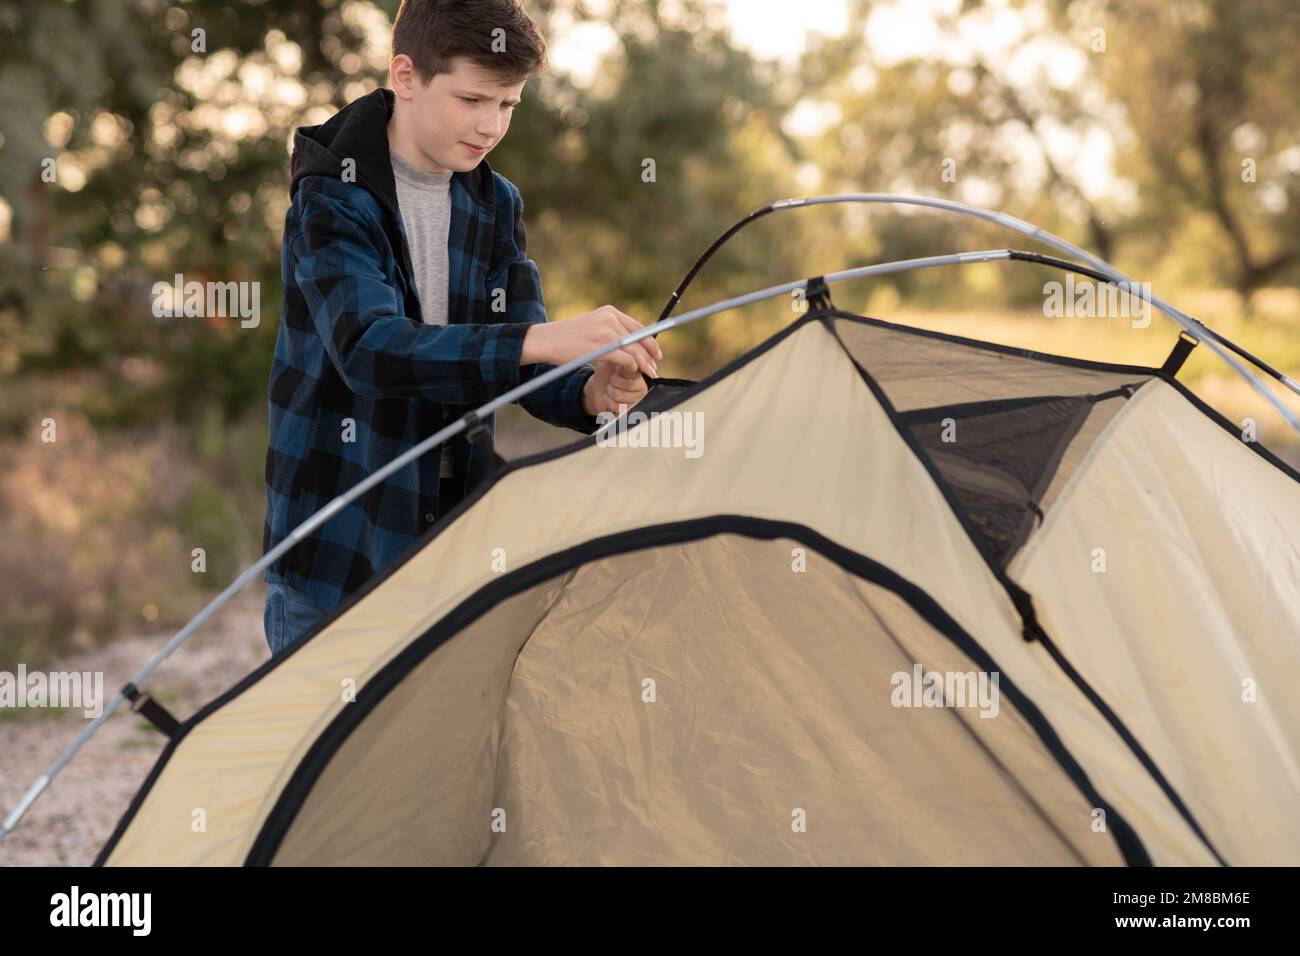 Camping people outdoor summer lifestyle tourists. boy installing tent. Natural children education Stock Photo